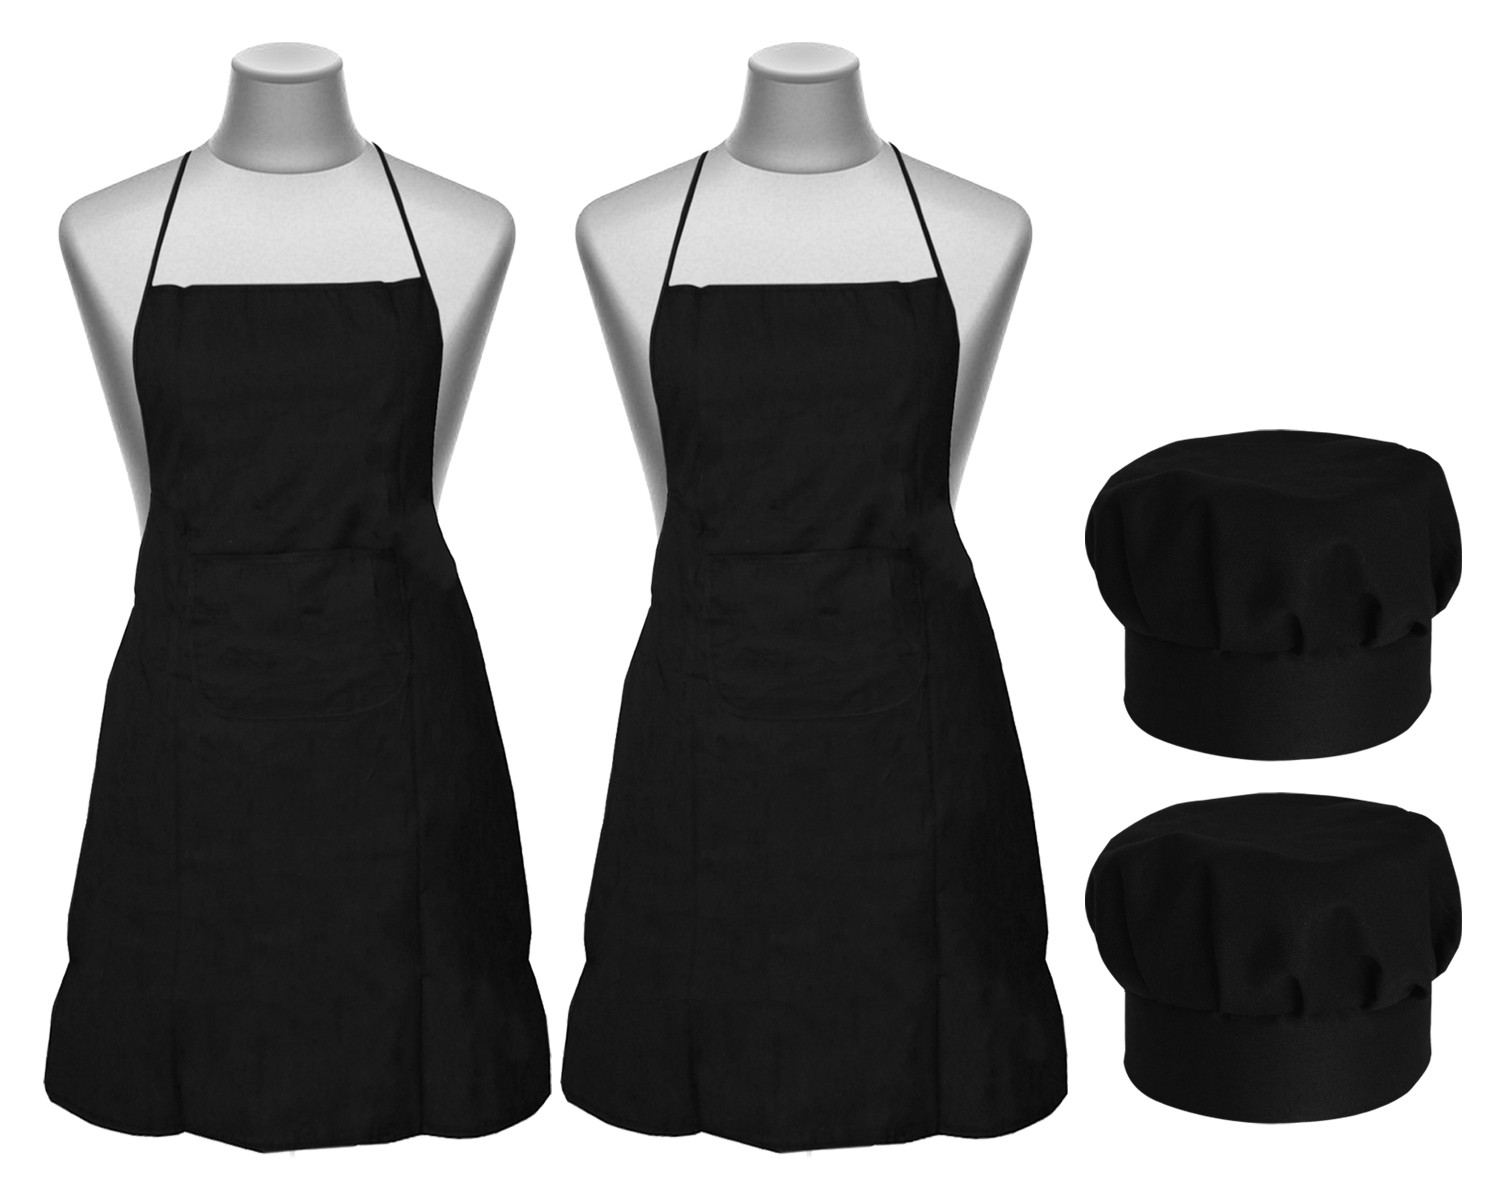 Kuber Industries Apron & Cooking Cap Set For Cooking, Baking, Party Favors, Home Kitchen, Restaurant,(Black)